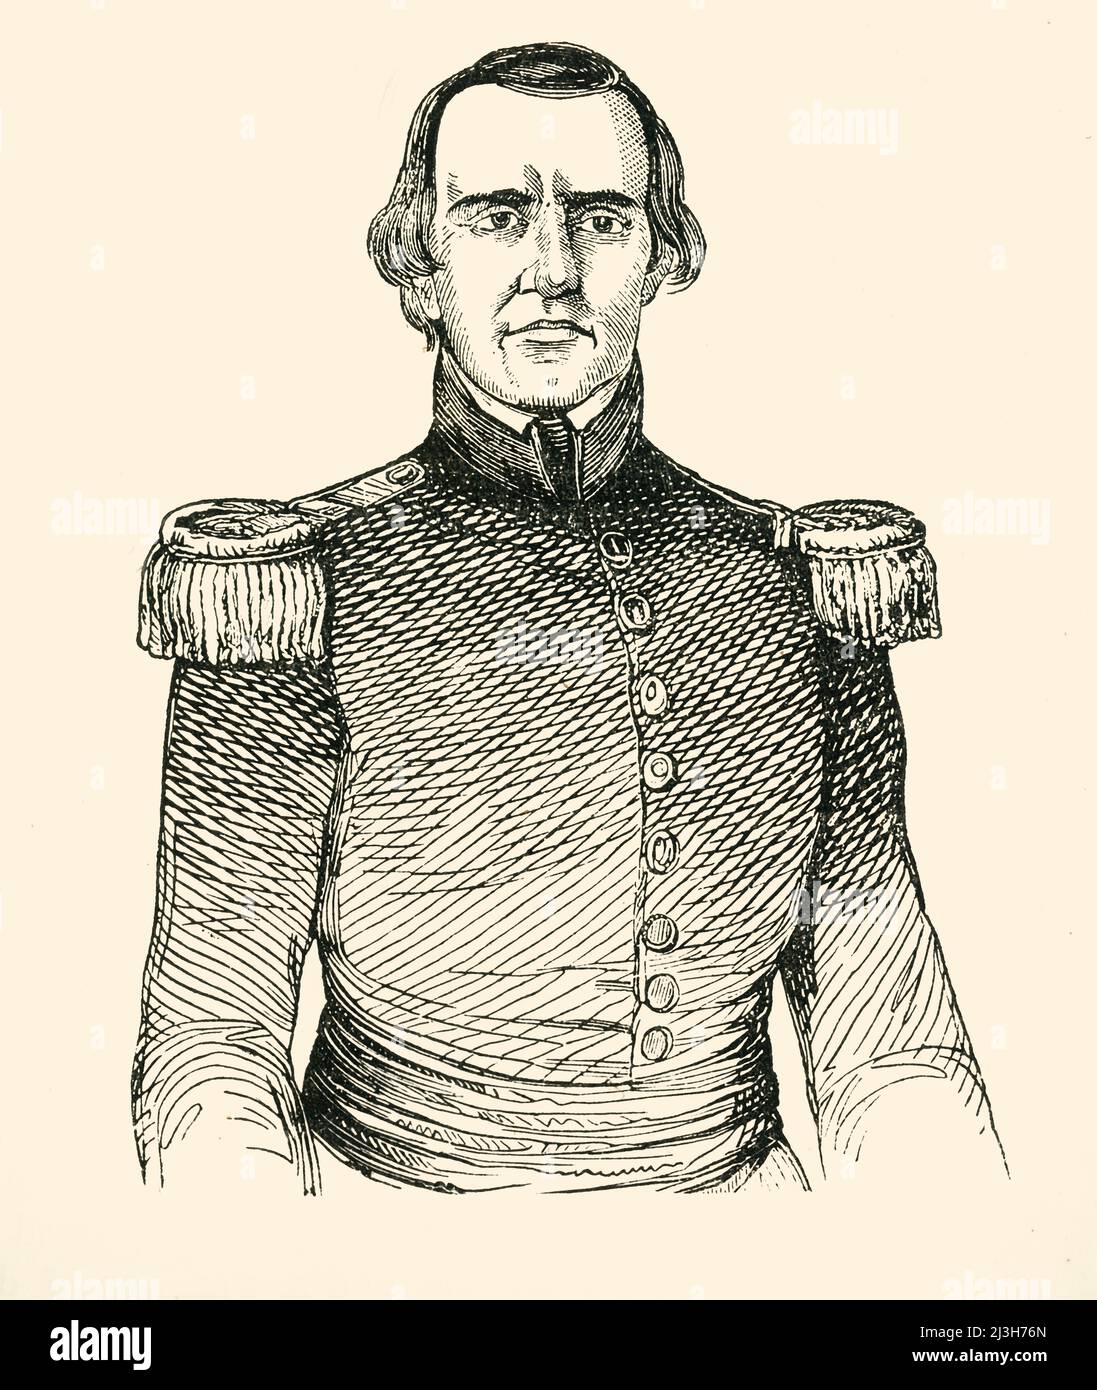 'Captain McCulloch', 1849. American soldier and Texas Ranger Benjamin McCulloch fought in the Texas Revolution, the Mexican-American War and the American Civil War. From &quot;Pictorial History of Mexico and the Mexican War&quot;, by John Frost, LL.D.. [Thomas, Cowperthwait and Co., Philadelphia, 1849] Stock Photo